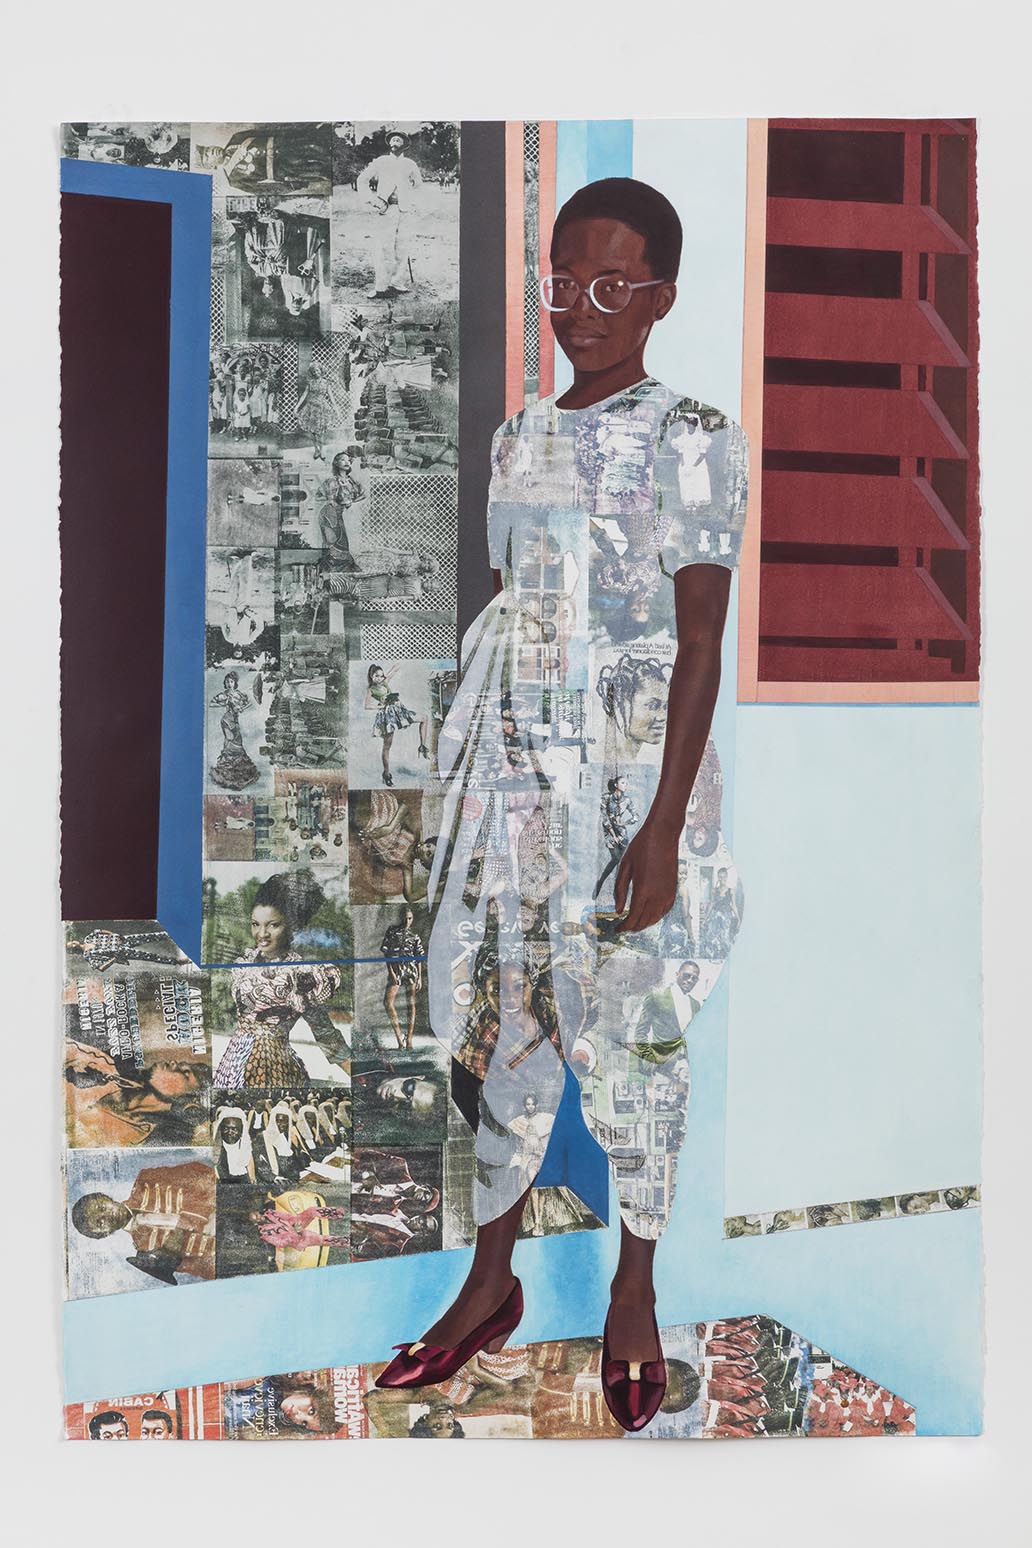 Njideka Akunyili Crosby, The Beautyful Ones no.1, 2015. Acrylic, pastel, colored pencils, and Xerox transfers on paper. 60 x 42 inches. Courtesy of the artist and Victoria Miro, London. Photo by Jason Wyche.